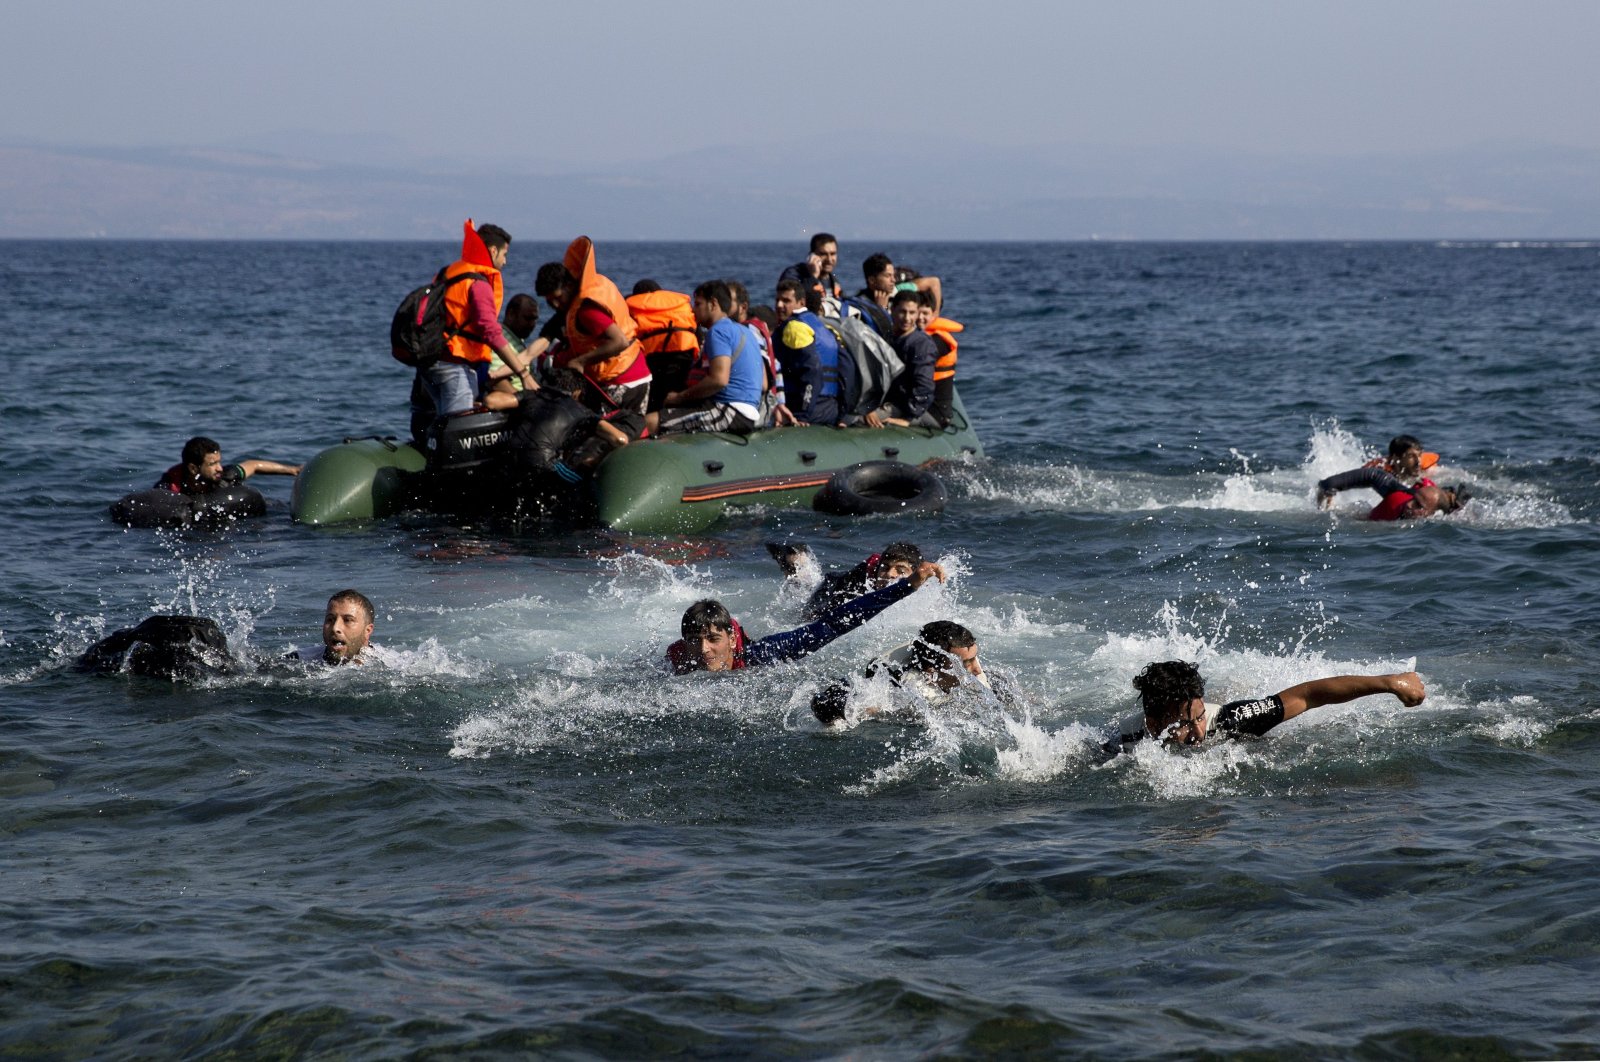 Migrants whose boat stalled at sea while crossing from Turkey to Greece swim toward the shore of the island of Lesbos, Greece, Sept. 20, 2015. (AP Photo)